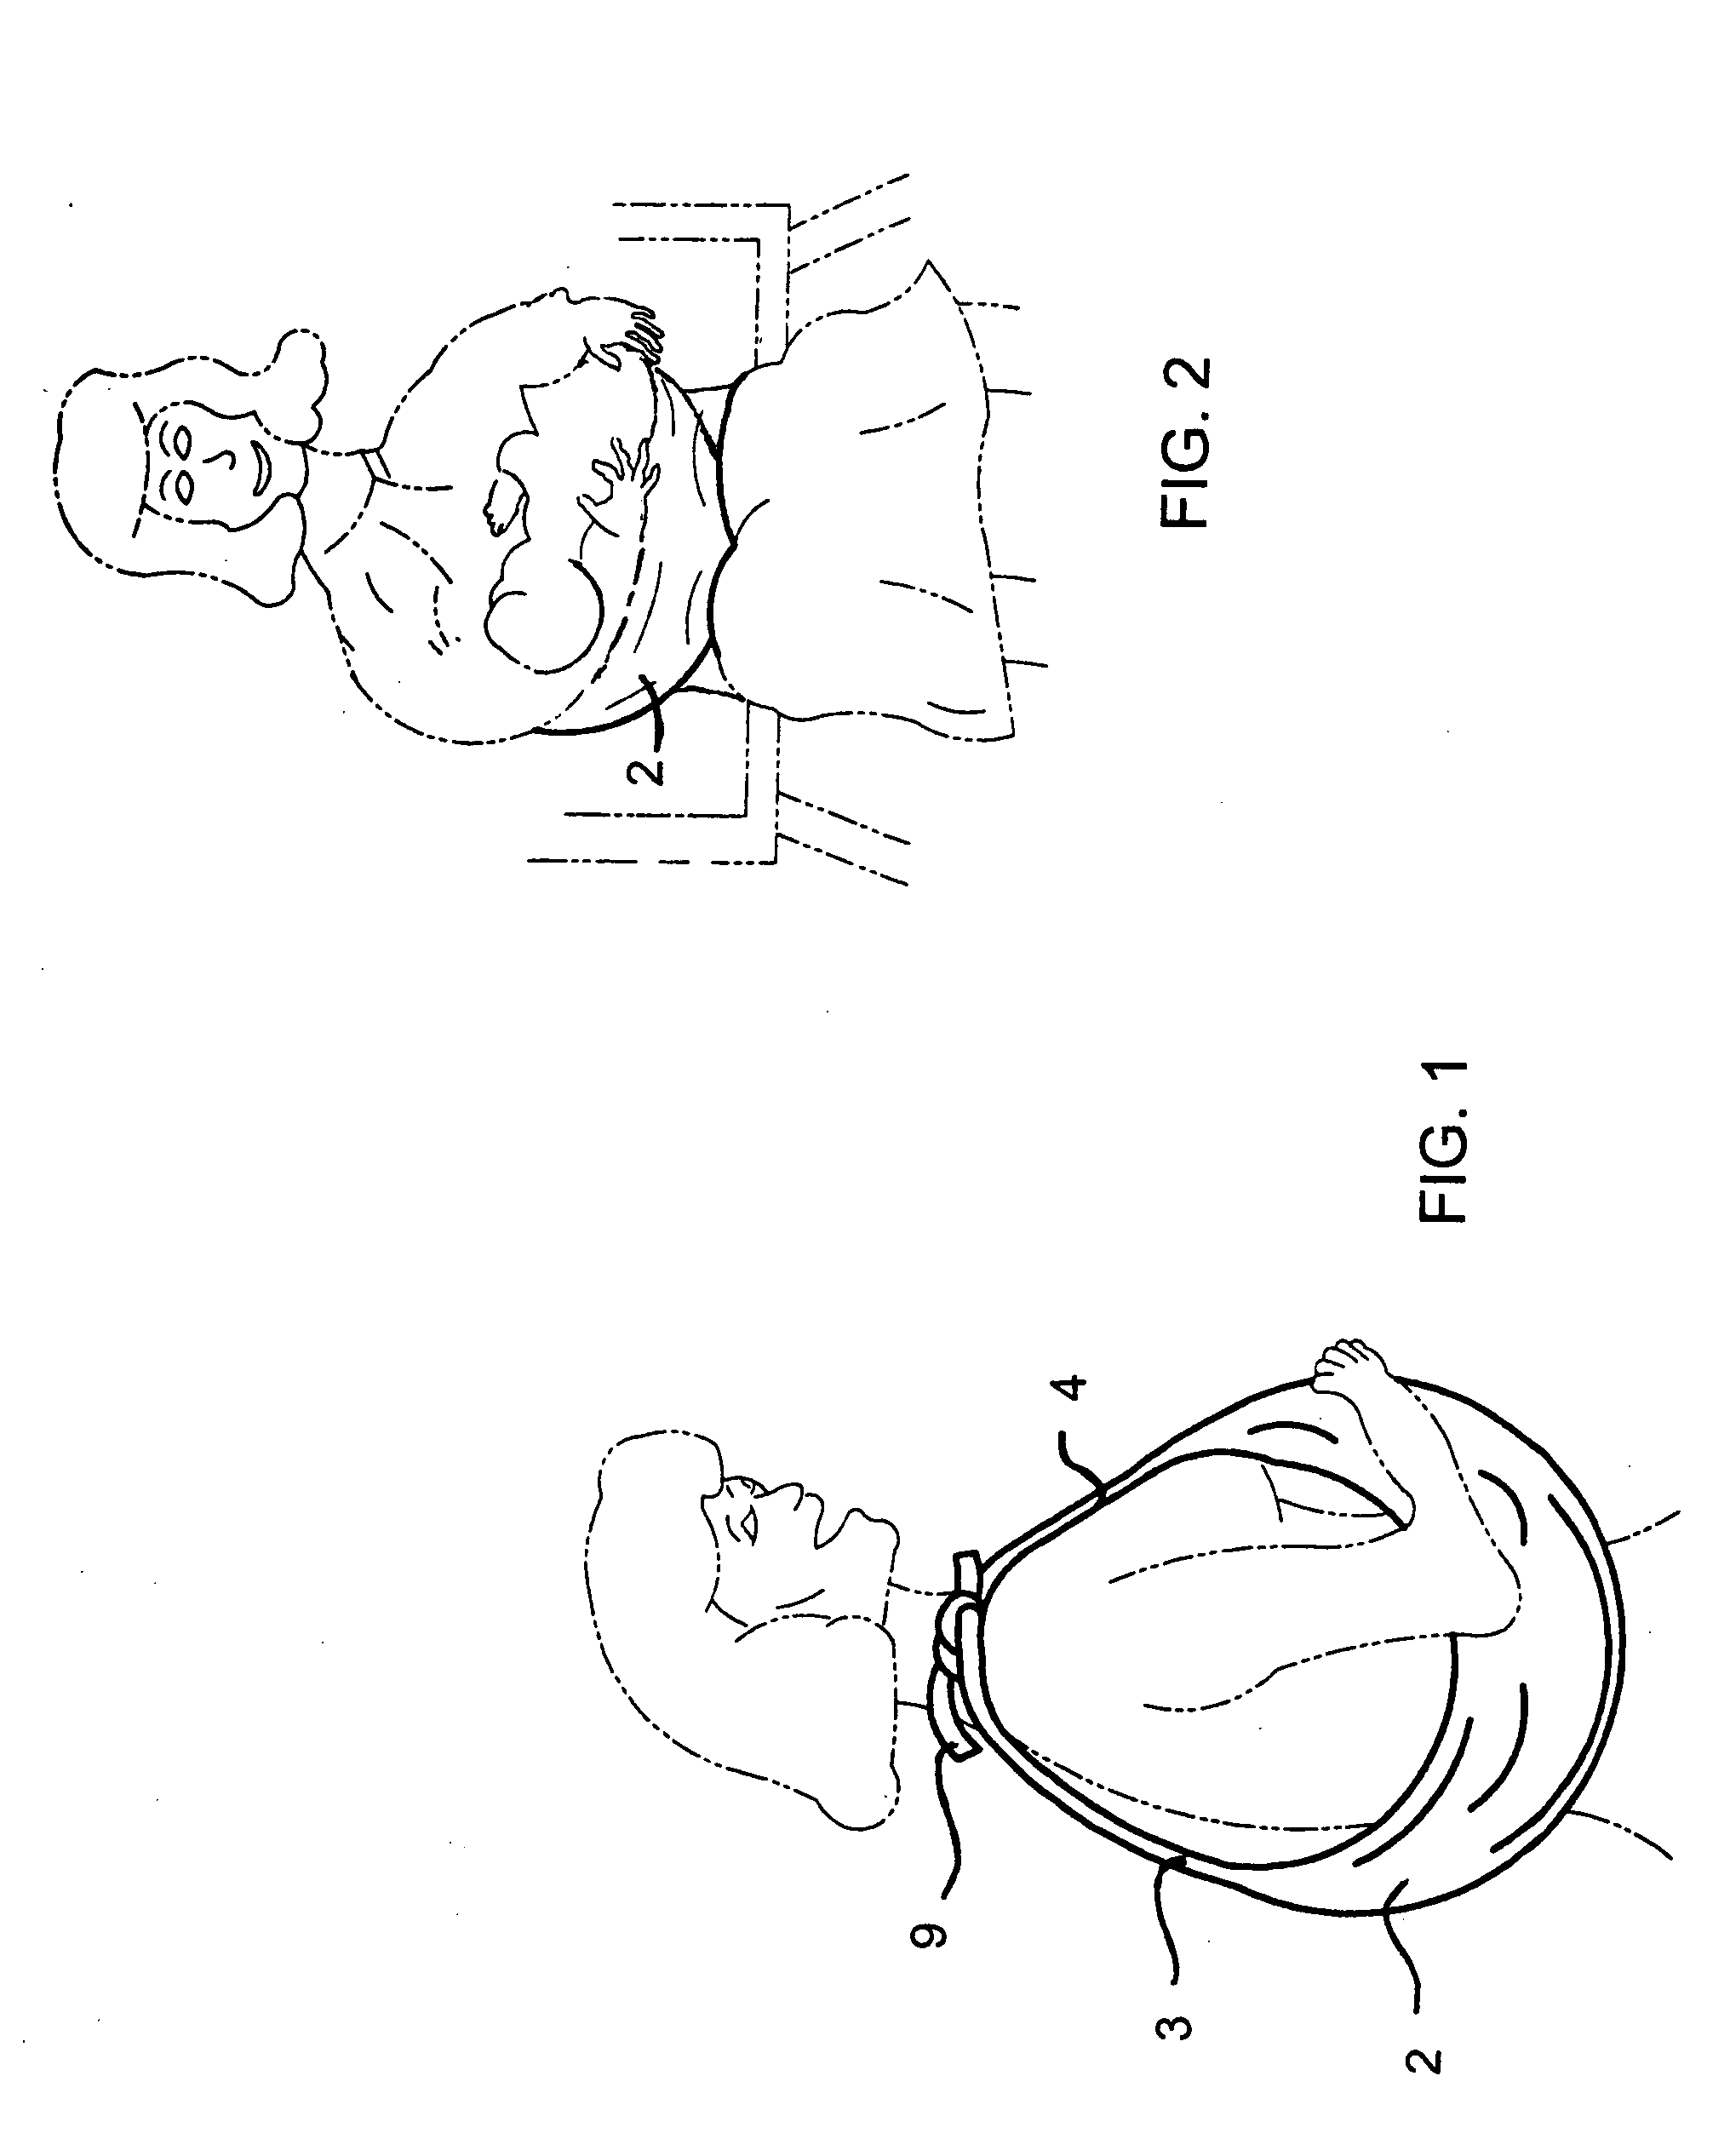 Nursing purse and method for converting a purse to a nursing pillow